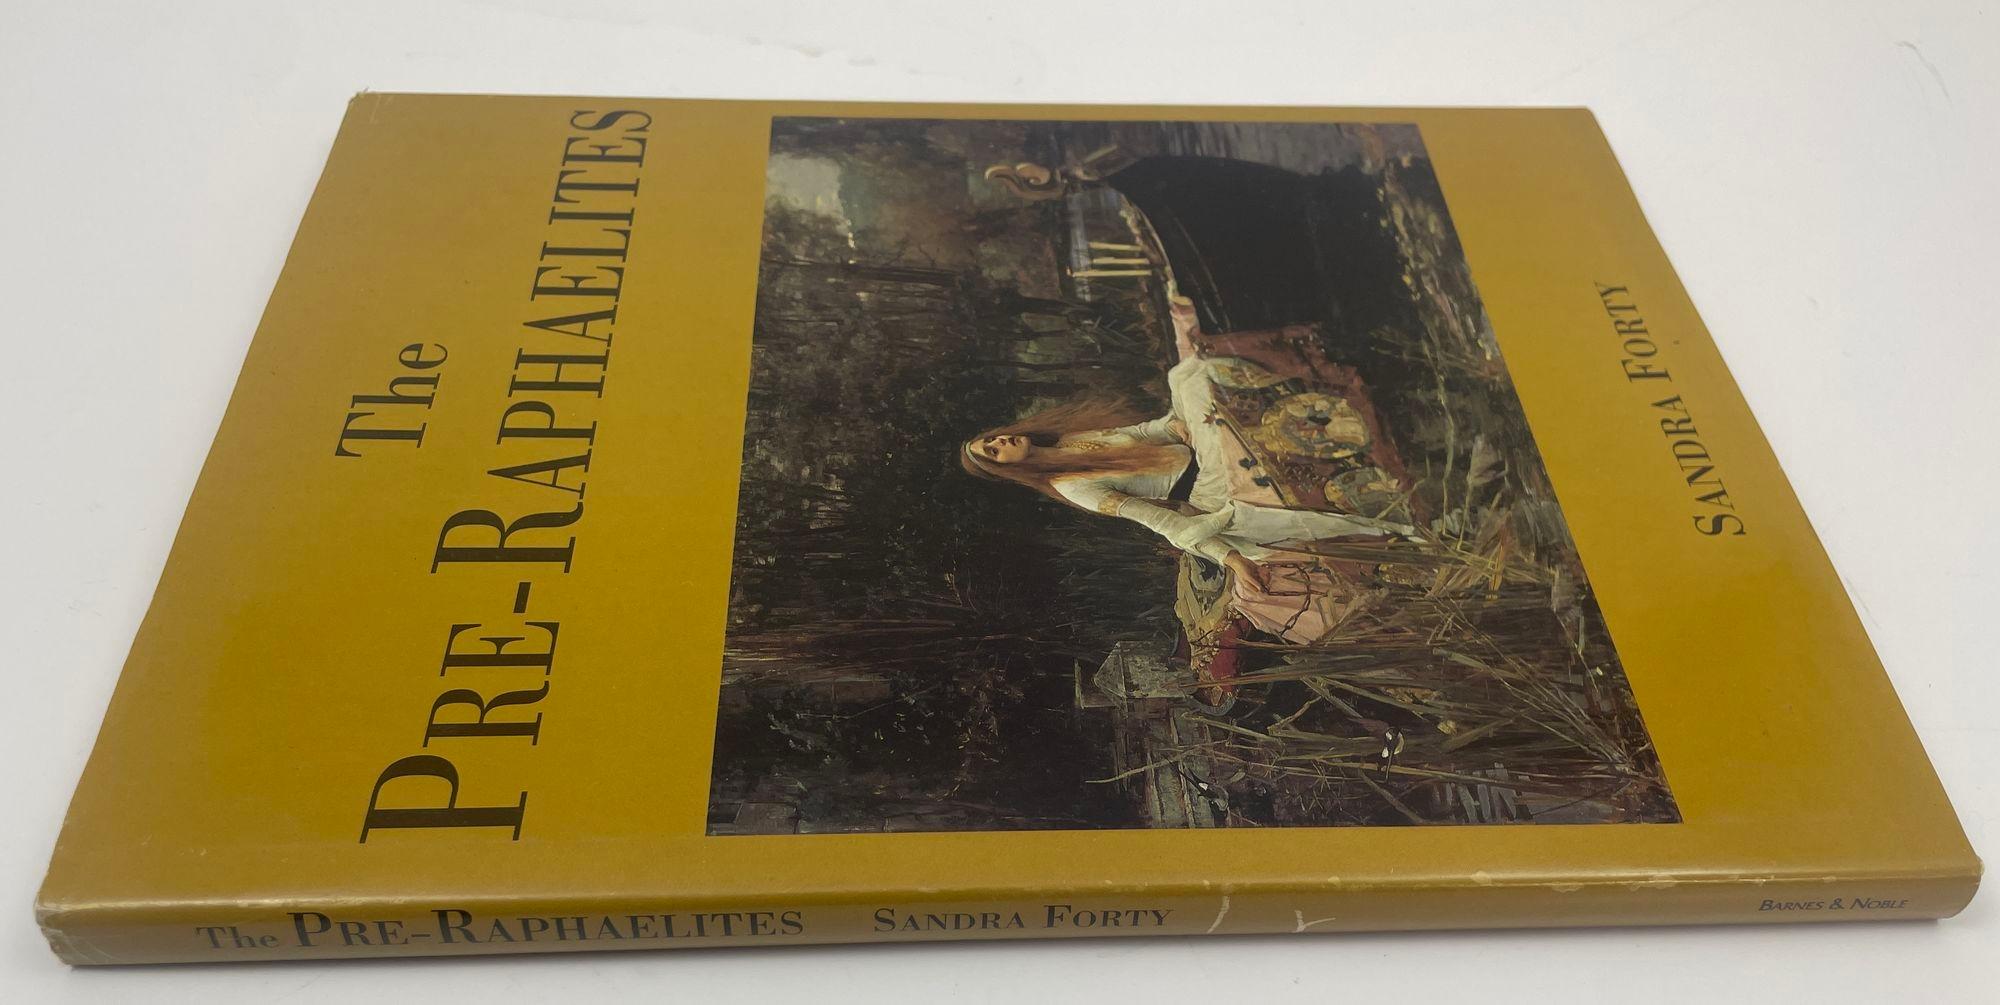 The Pre-Raphaelites by Sandra Forty Hardcover Book.
Title: The Pre-Raphaelites
Publisher: Barnes & Noble Books, U.S.A.
Publication Date: 1997
Binding: Hardcover
Condition: Near Fine
Dust Jacket Condition: Good
Edition: 1st Edition.
Dante Gabriel